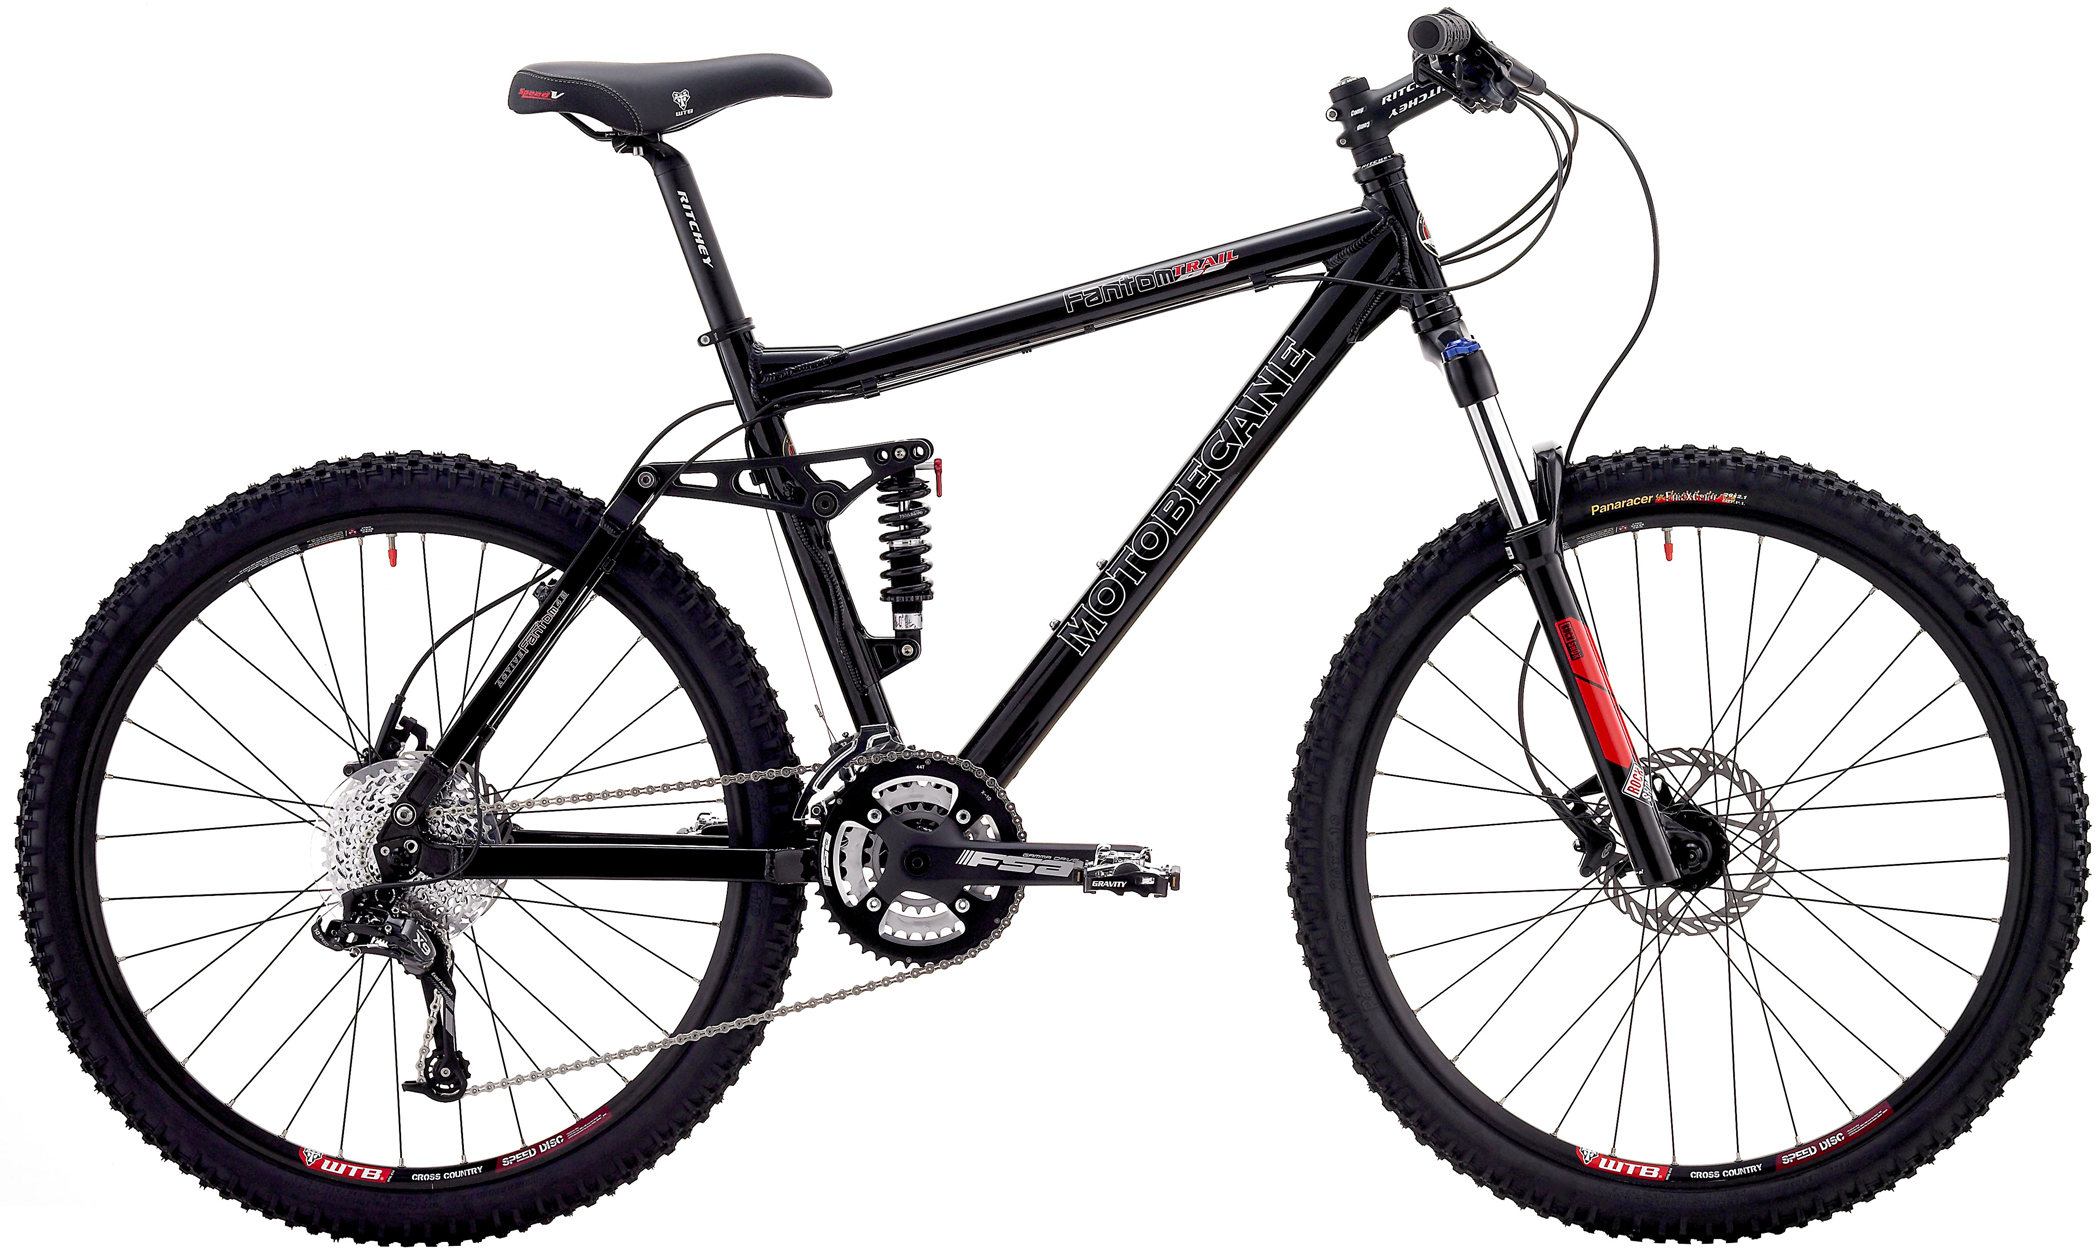 Save up to 60% off new Mountain Bikes - MTB